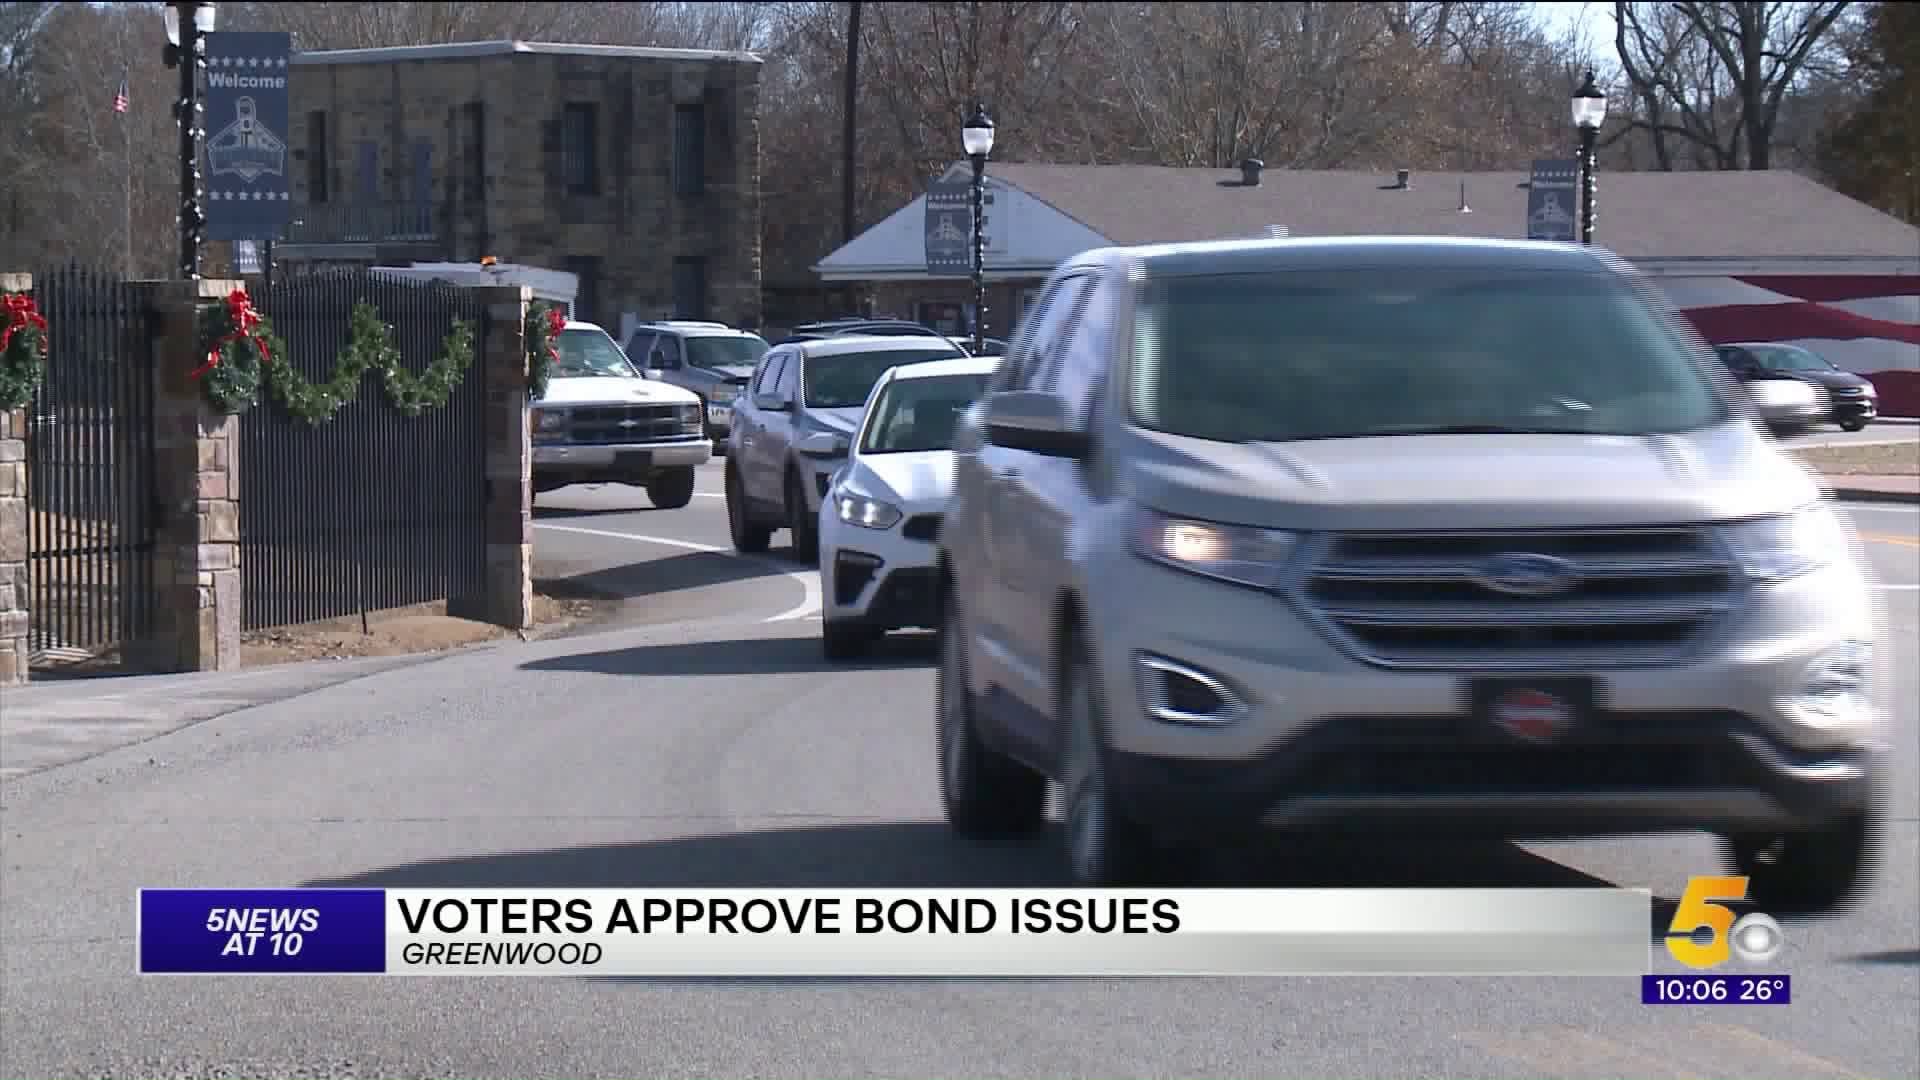 Voters Pass Special Bond Issues To Improve Traffic Congestion In Greenwood